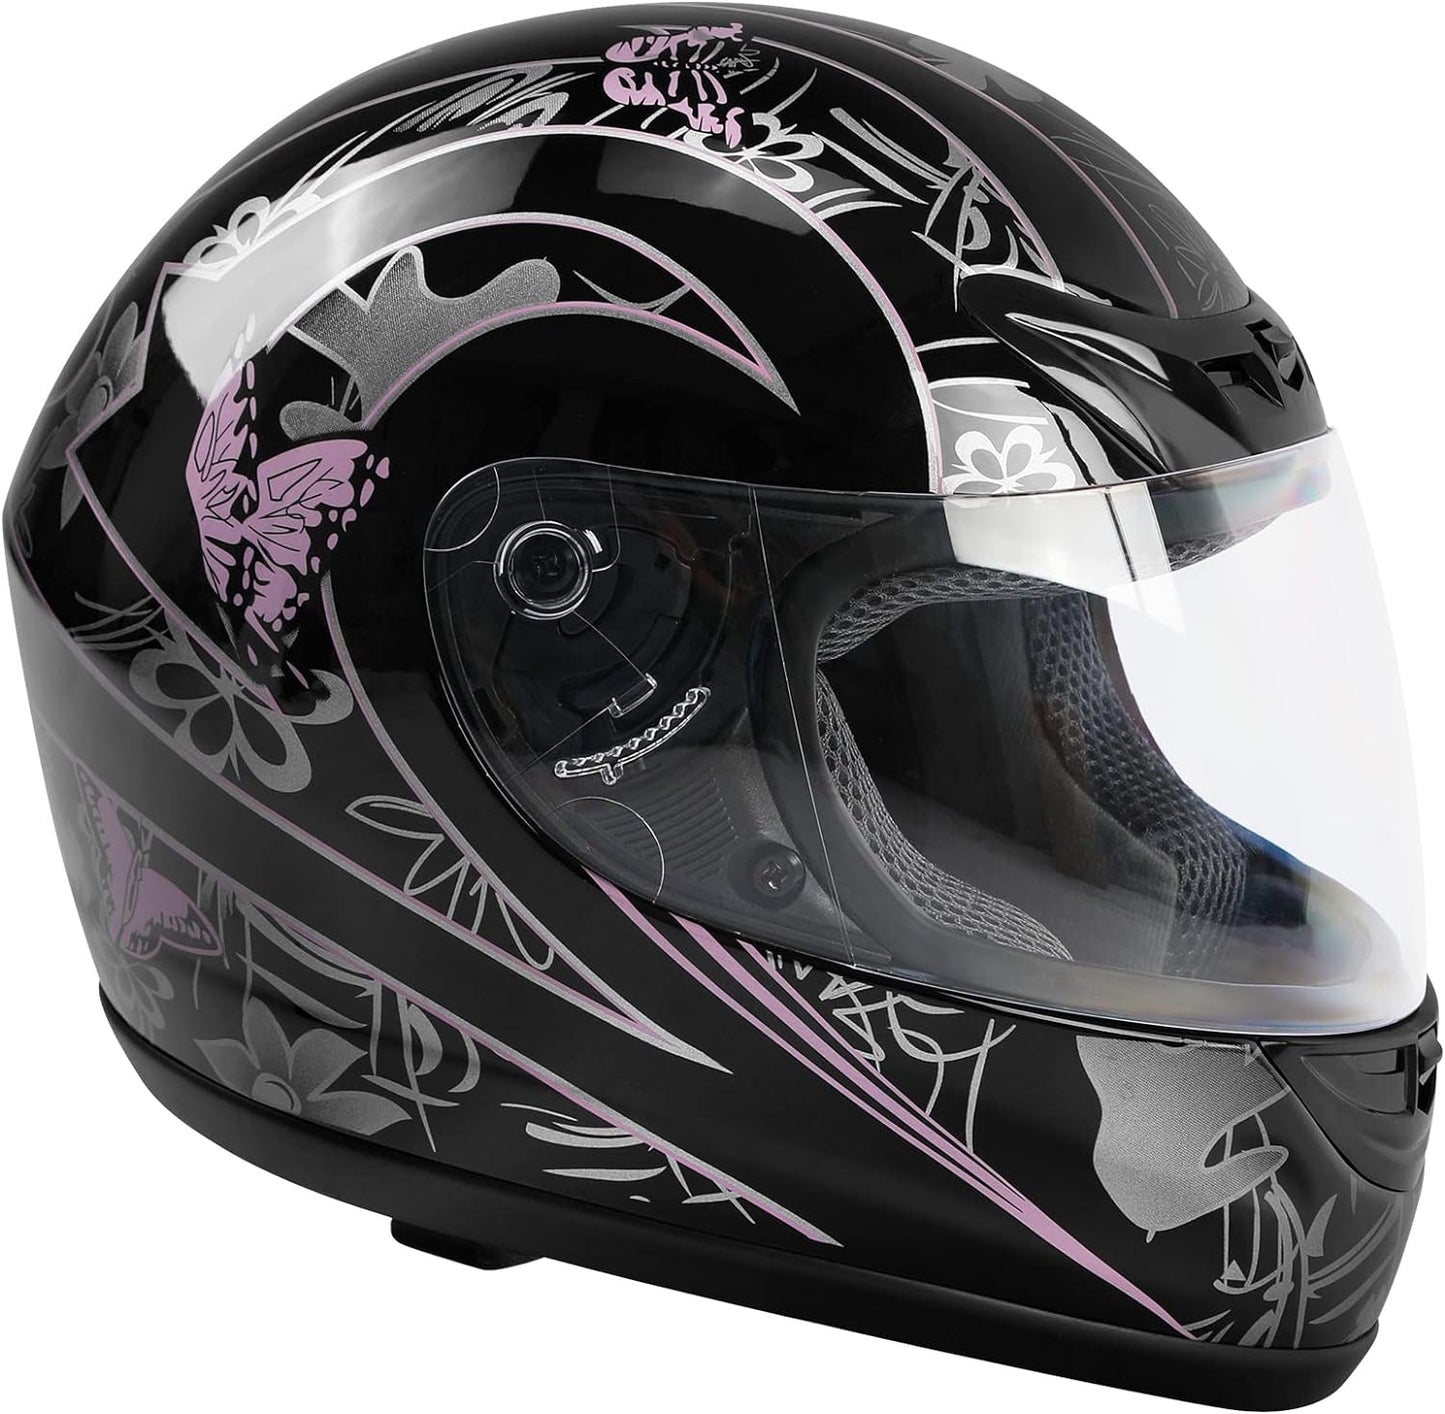 Motorcycle Helmet Sizes Small, Large & XL available New pink & white / black & pink available